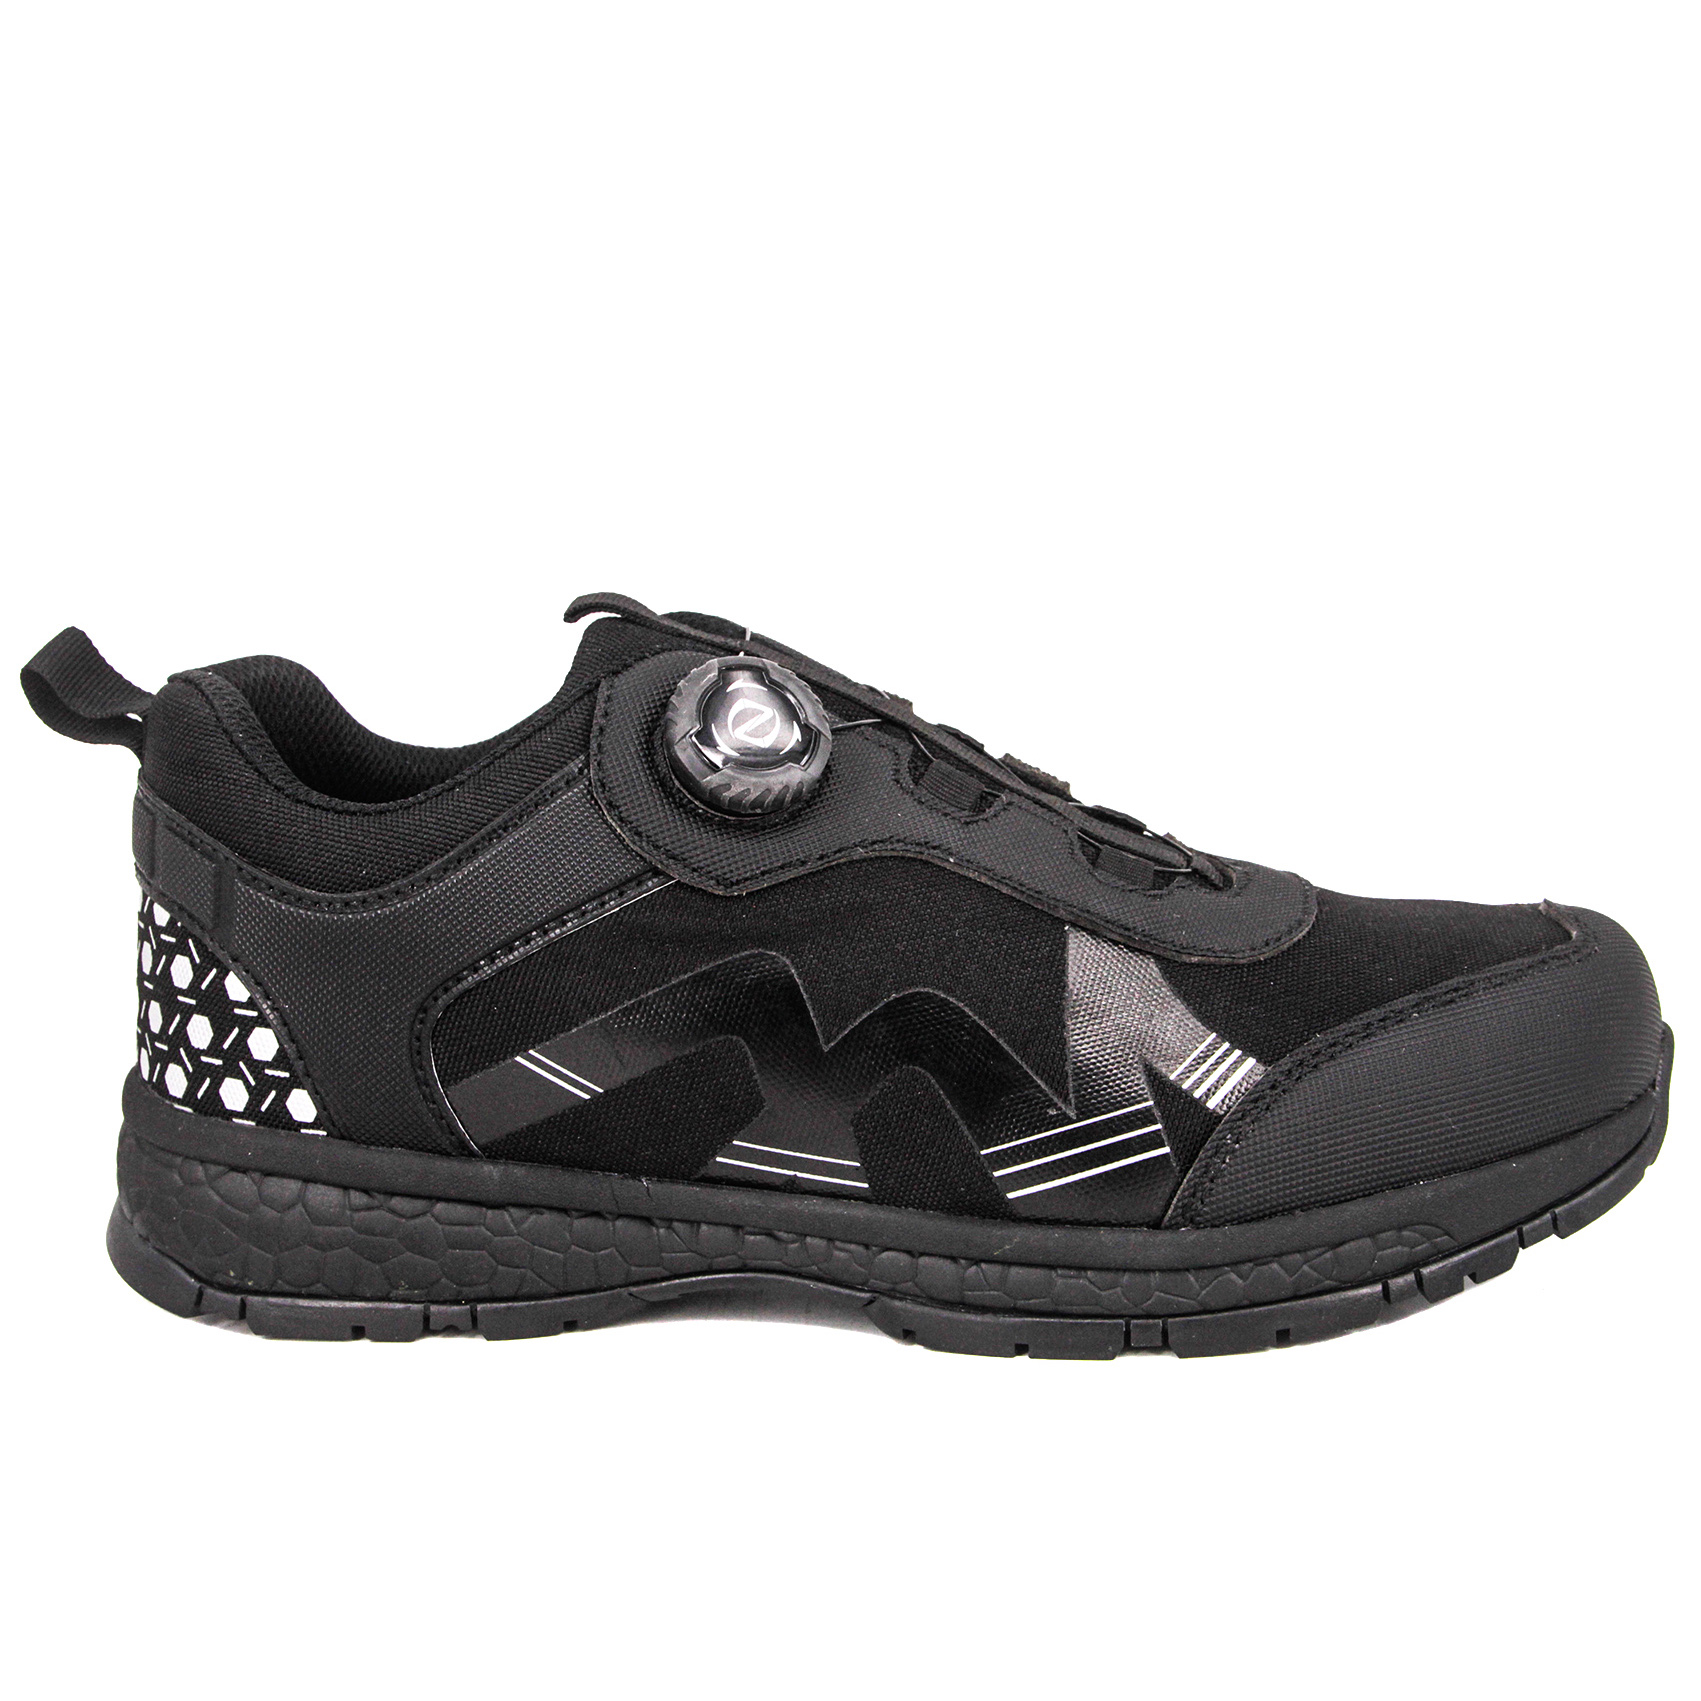 MILFORCE High Quality cheap Military safety shoe army shoe